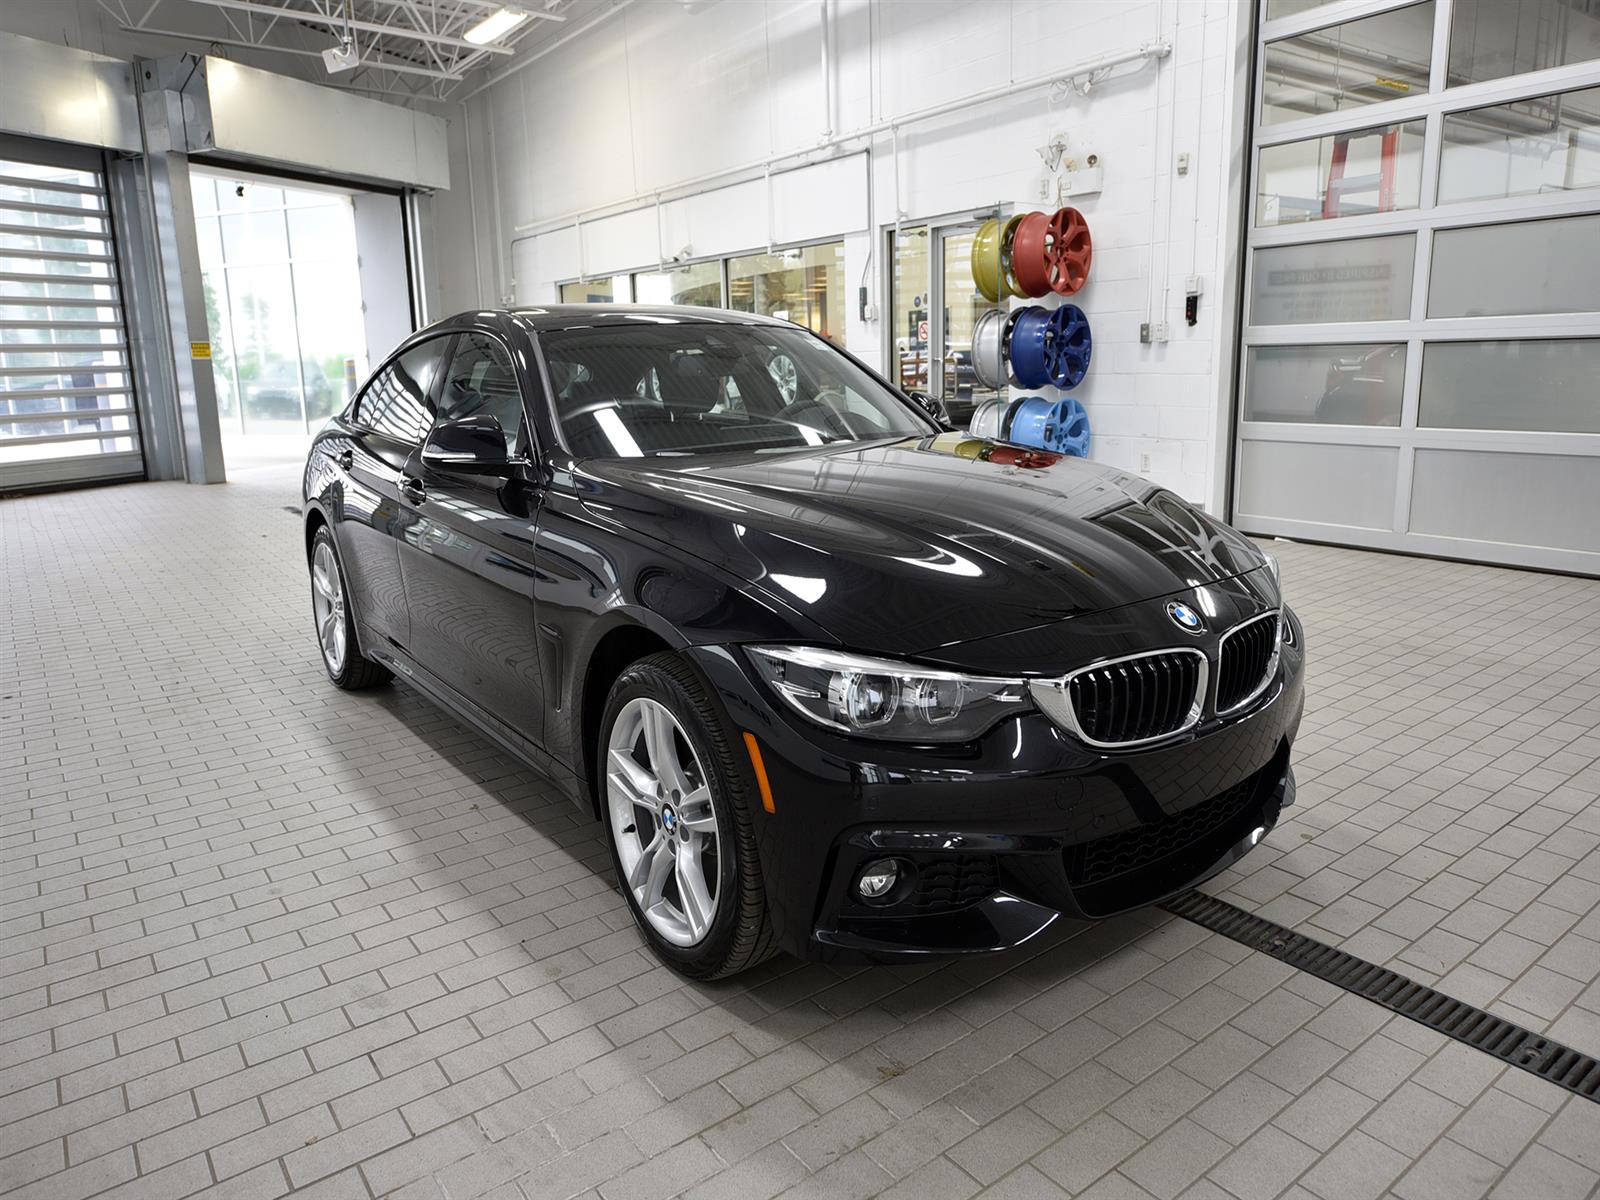 New 2019 BMW 430i xDrive Gran Coupe Coupe in Edmonton #194G5029